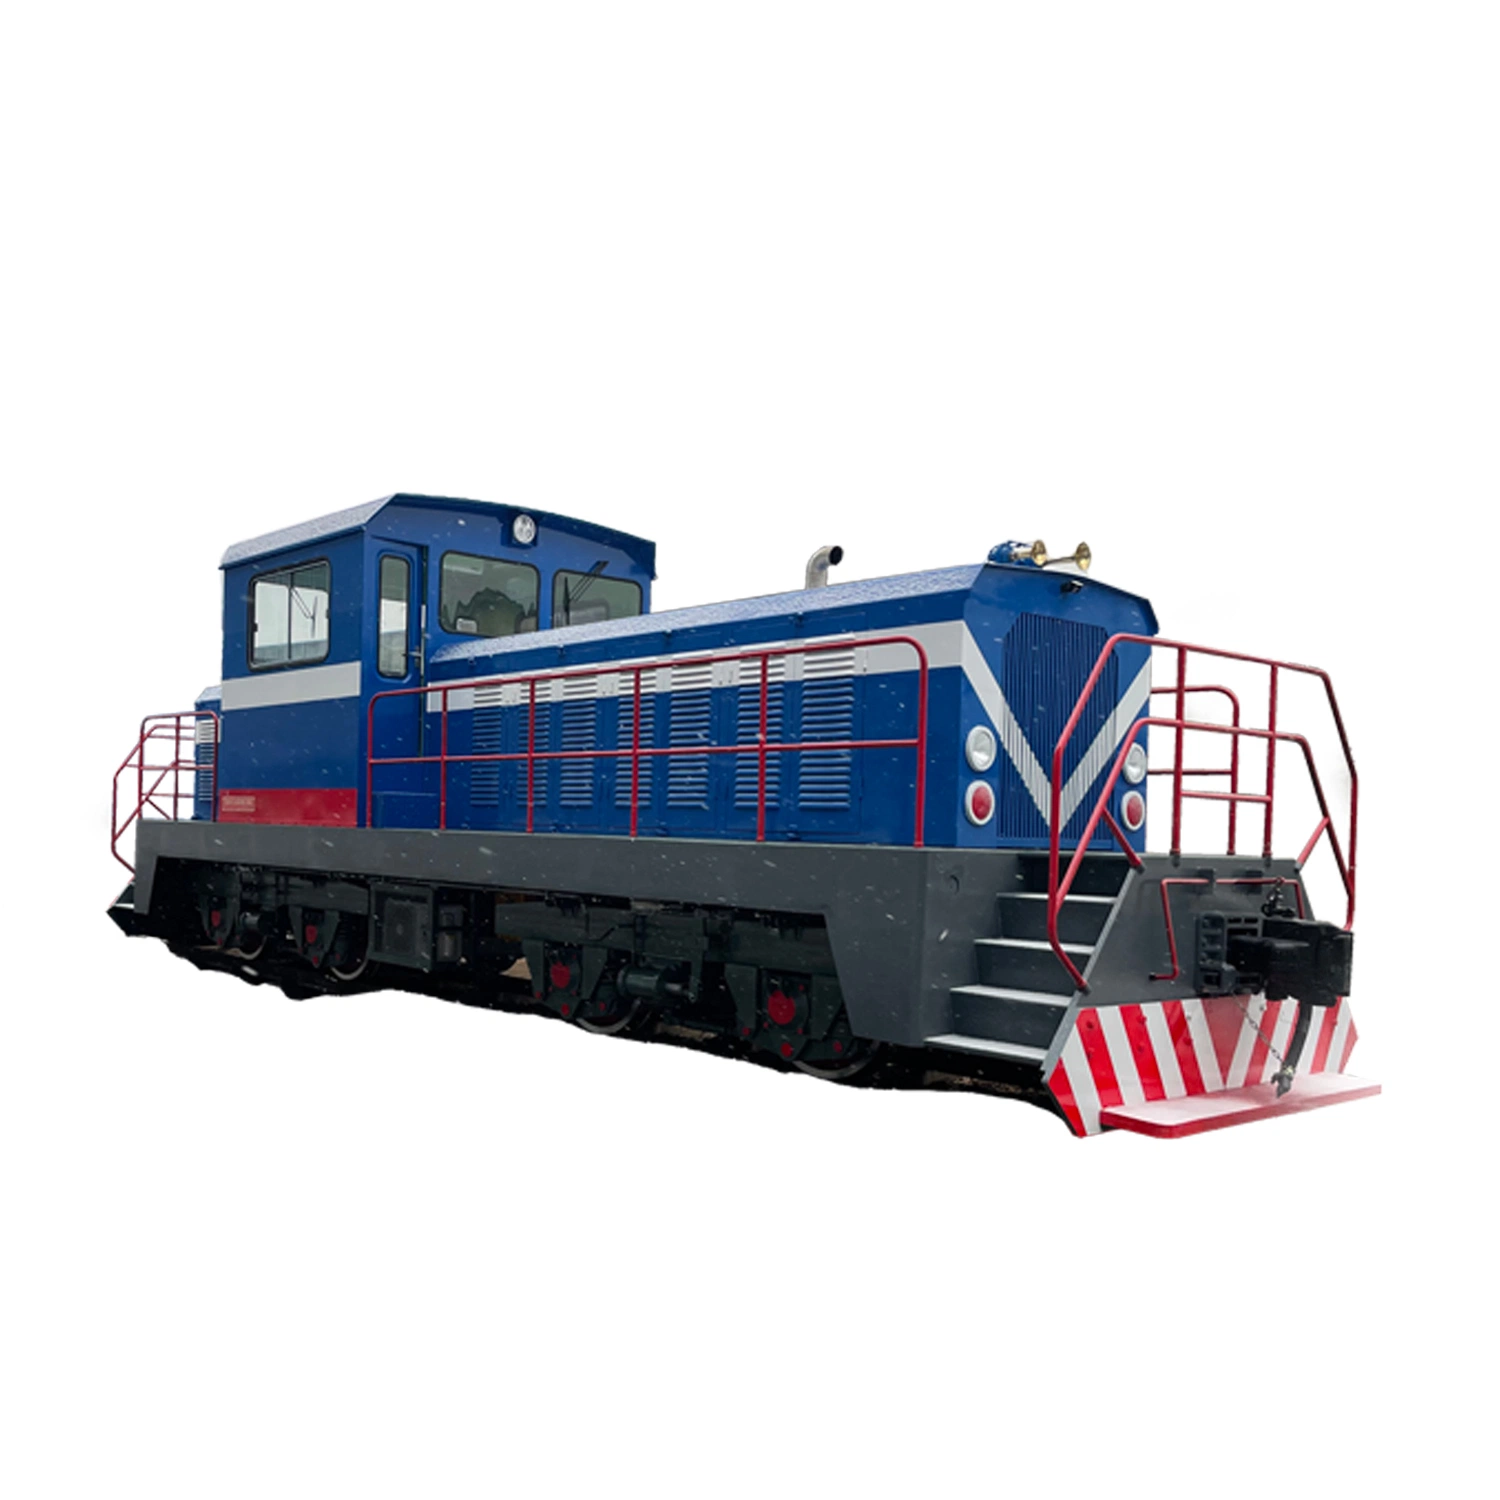 2X500HP Dual Power Diesel Shunting Locomotive for 5170 Tons Max. Traction Load